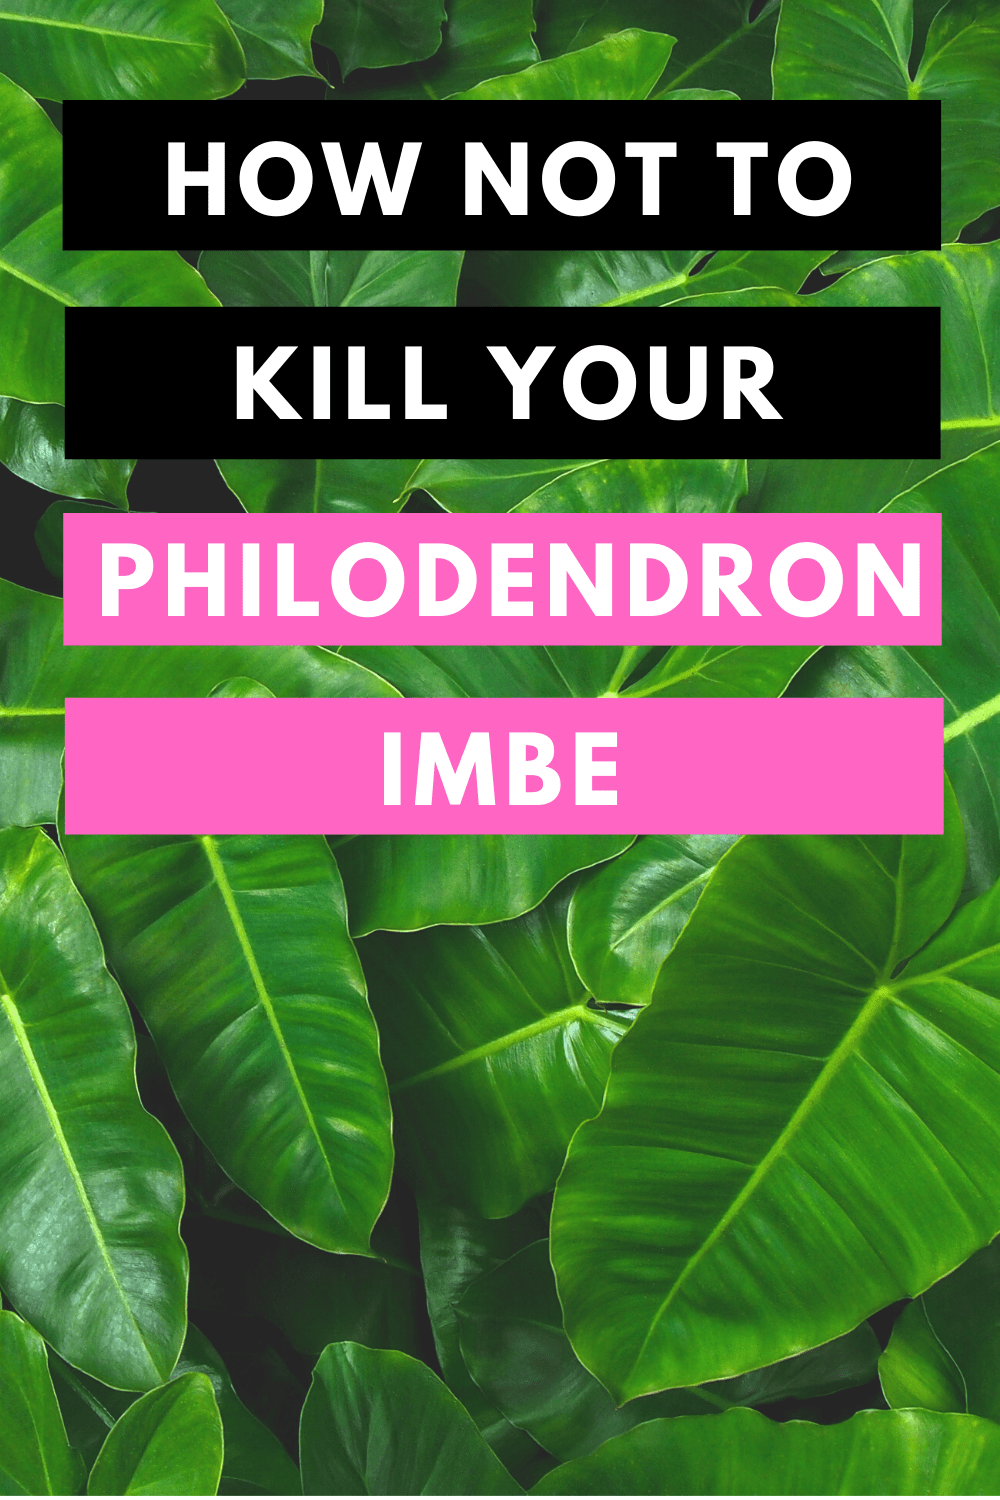 How Not To Kill Your Philodendron Imbe